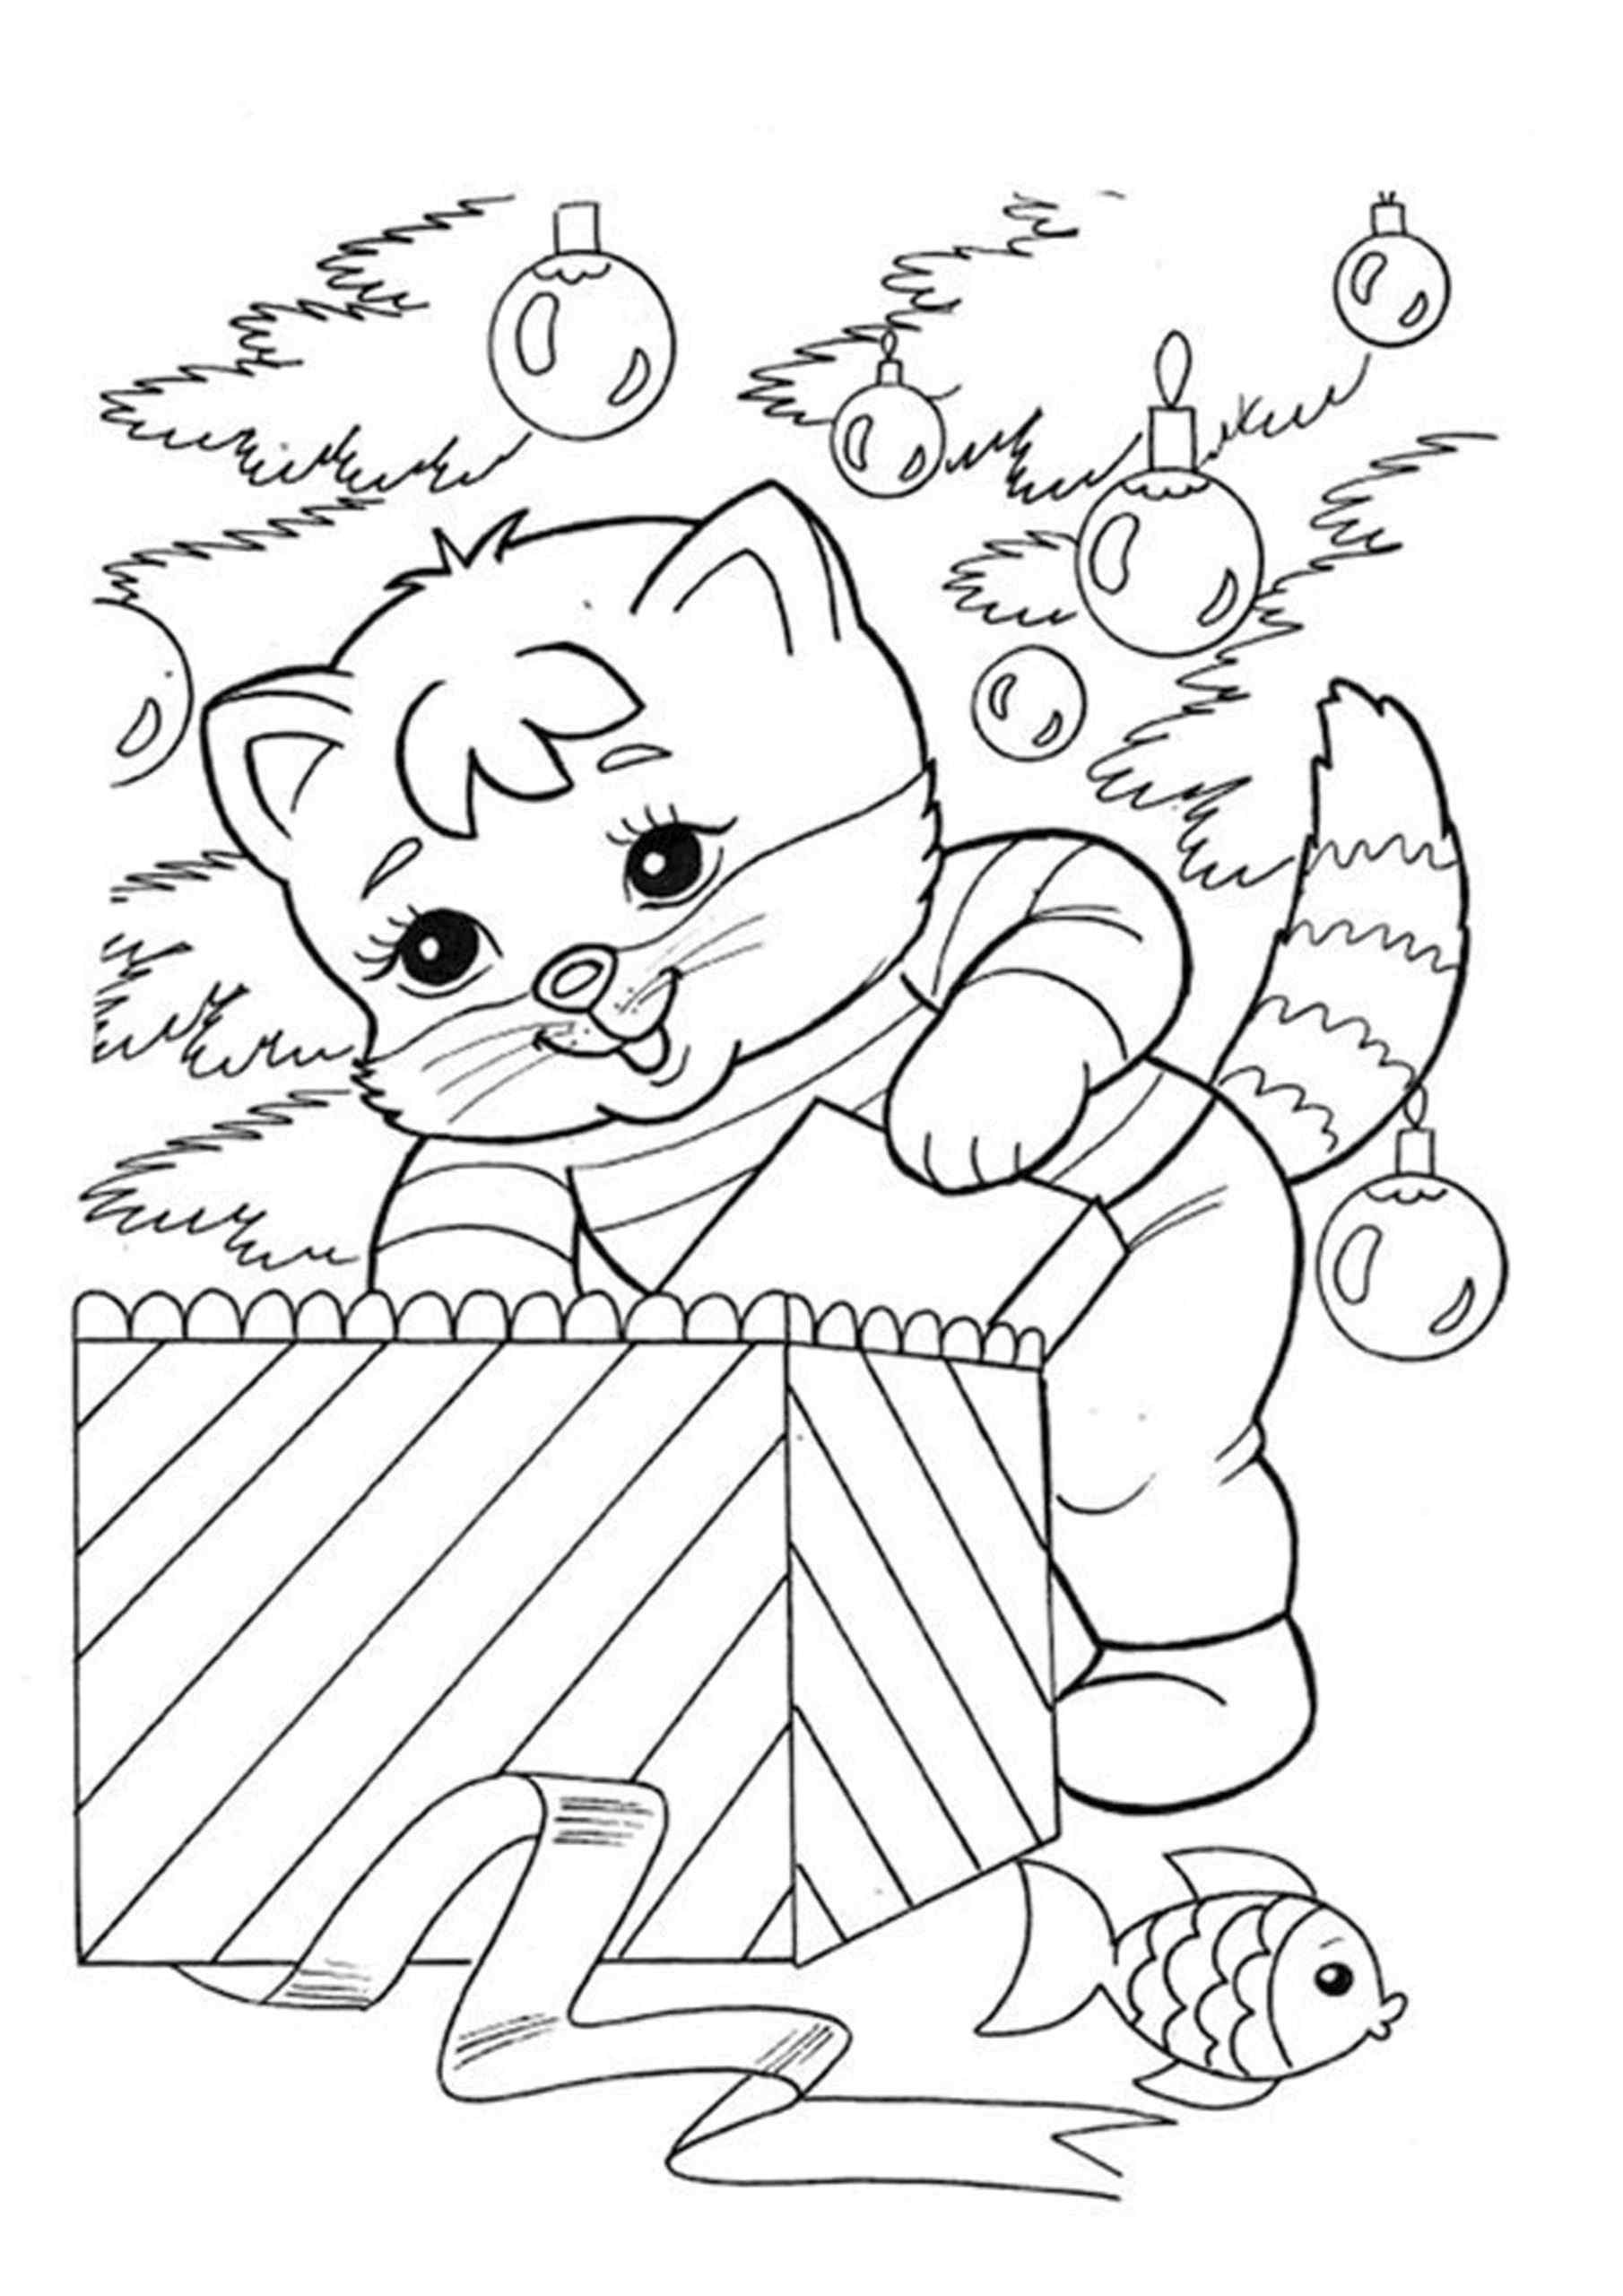 The Kitten Unpacks The Gift Coloring Page